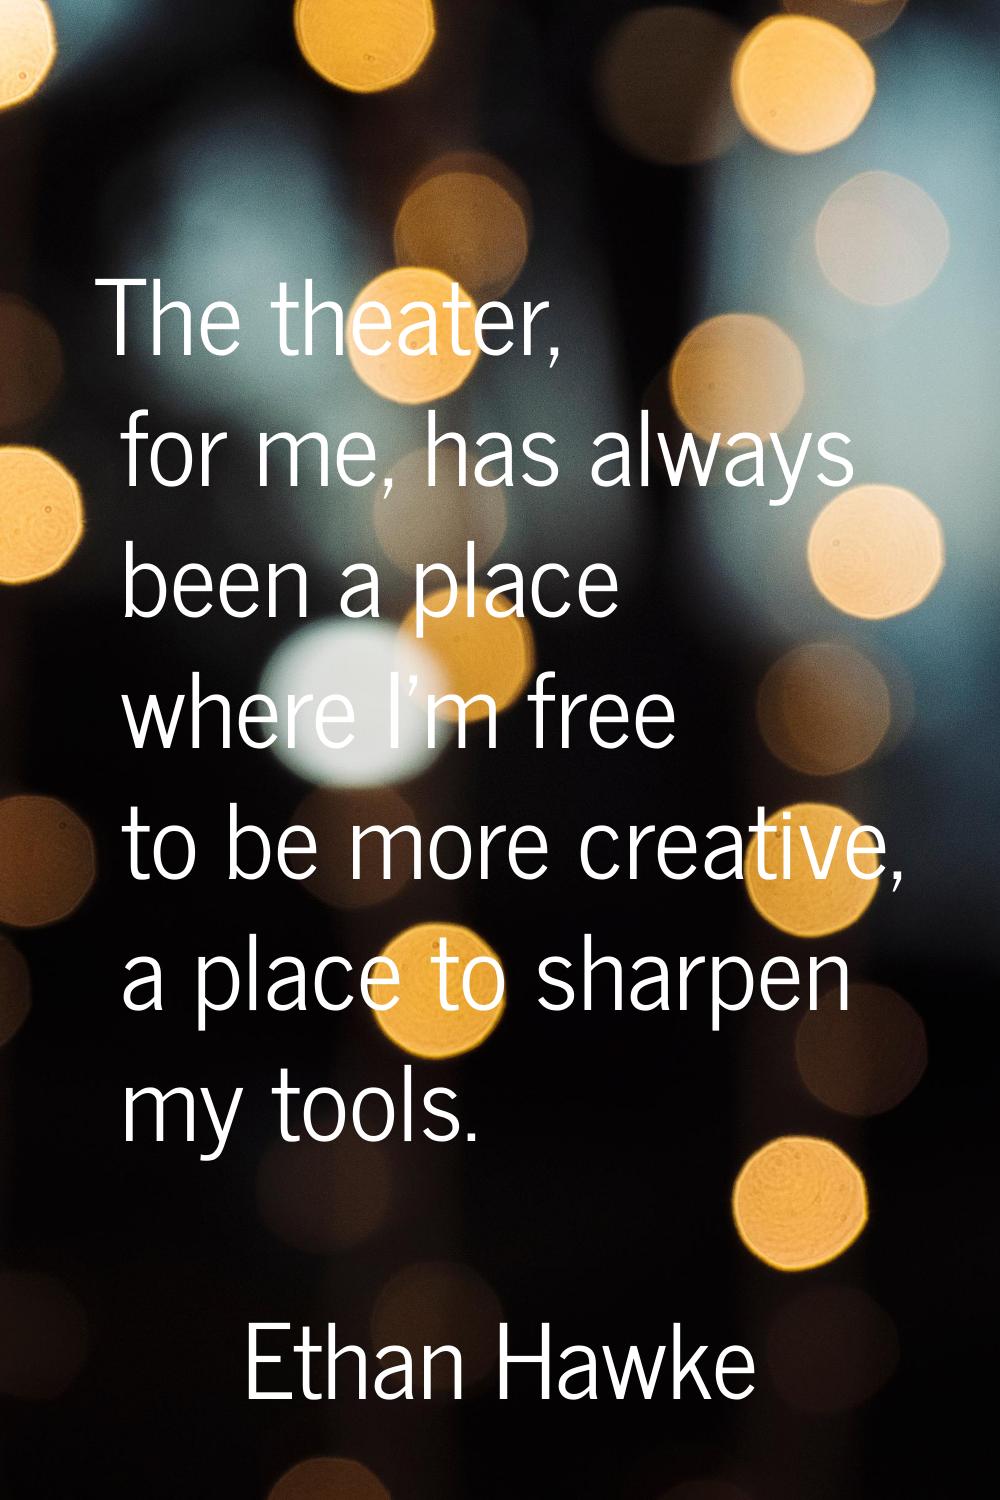 The theater, for me, has always been a place where I'm free to be more creative, a place to sharpen